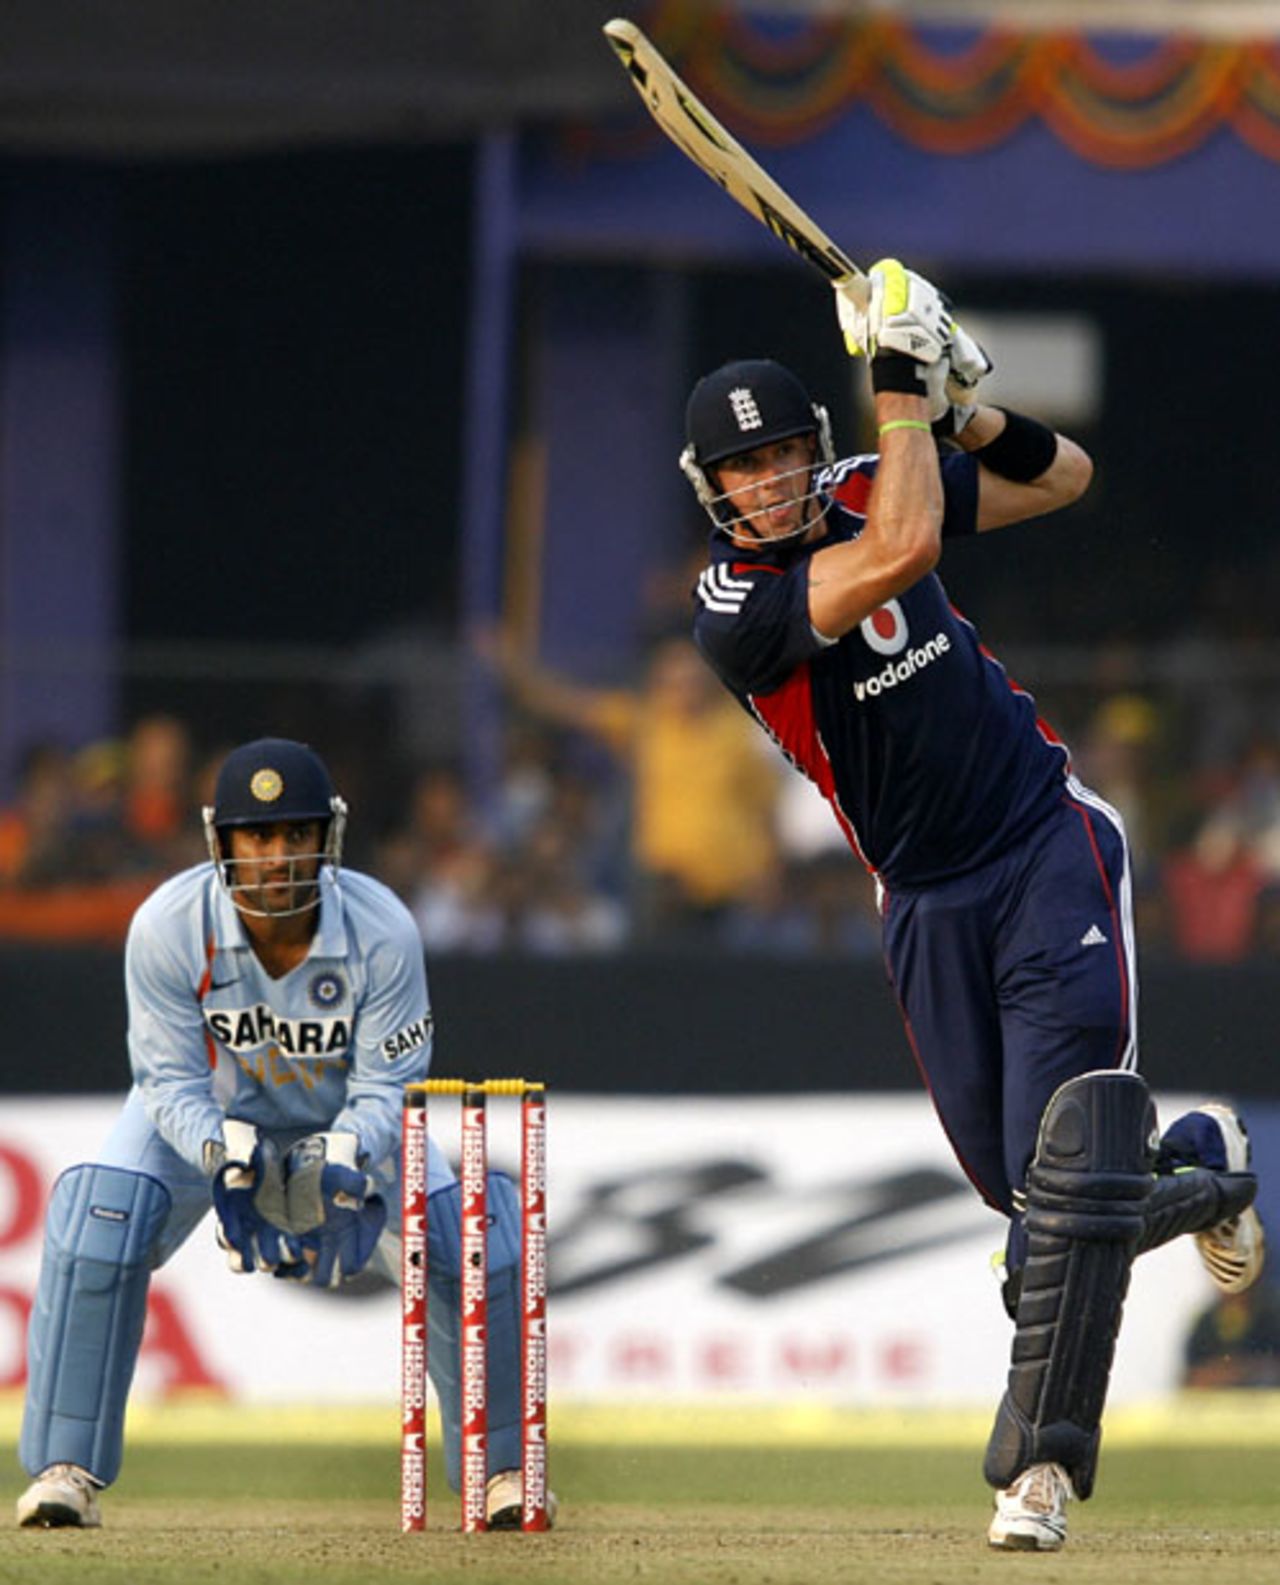 Kevin Pietersen finds his balance on one leg, India v England, 5th ODI, Cuttack, November 26, 2008